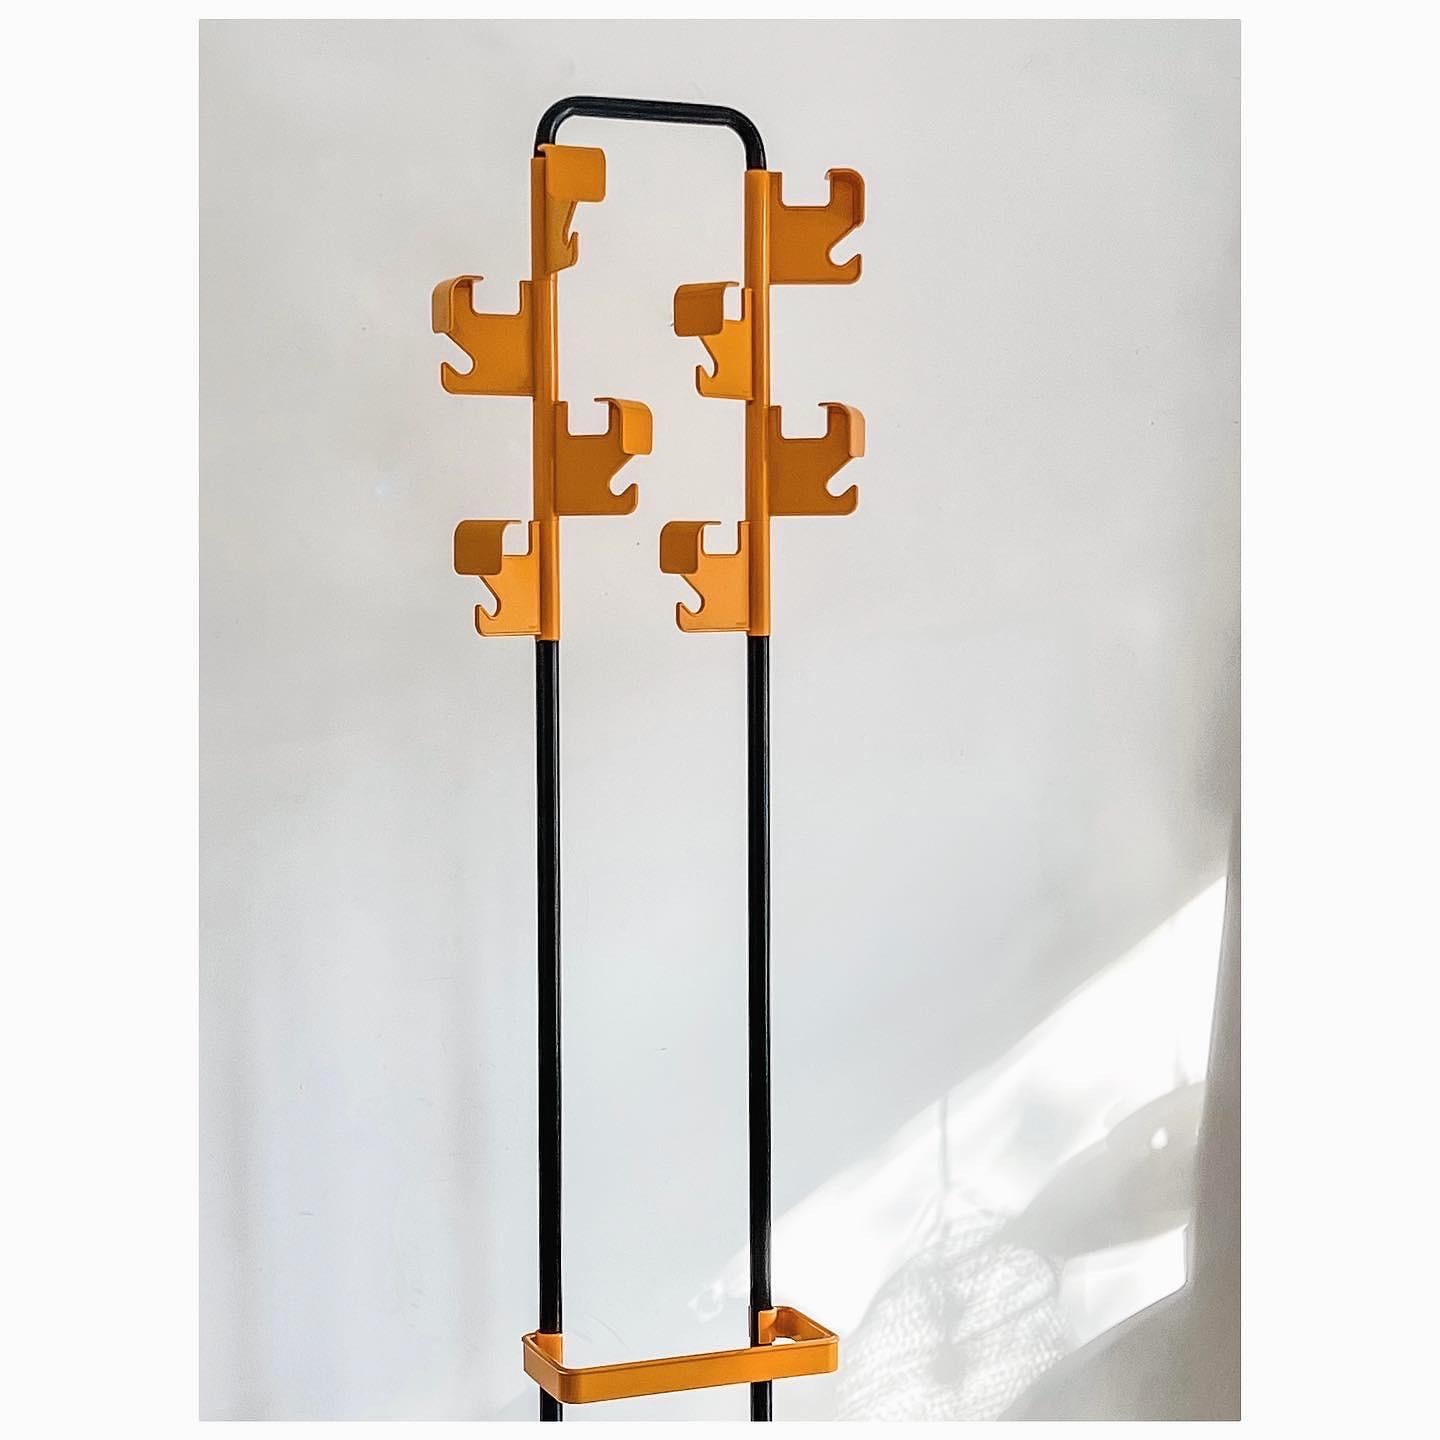 Metal Space Age Coat Rack by Jean-Pierre Vitrac for Manade, 1970s For Sale